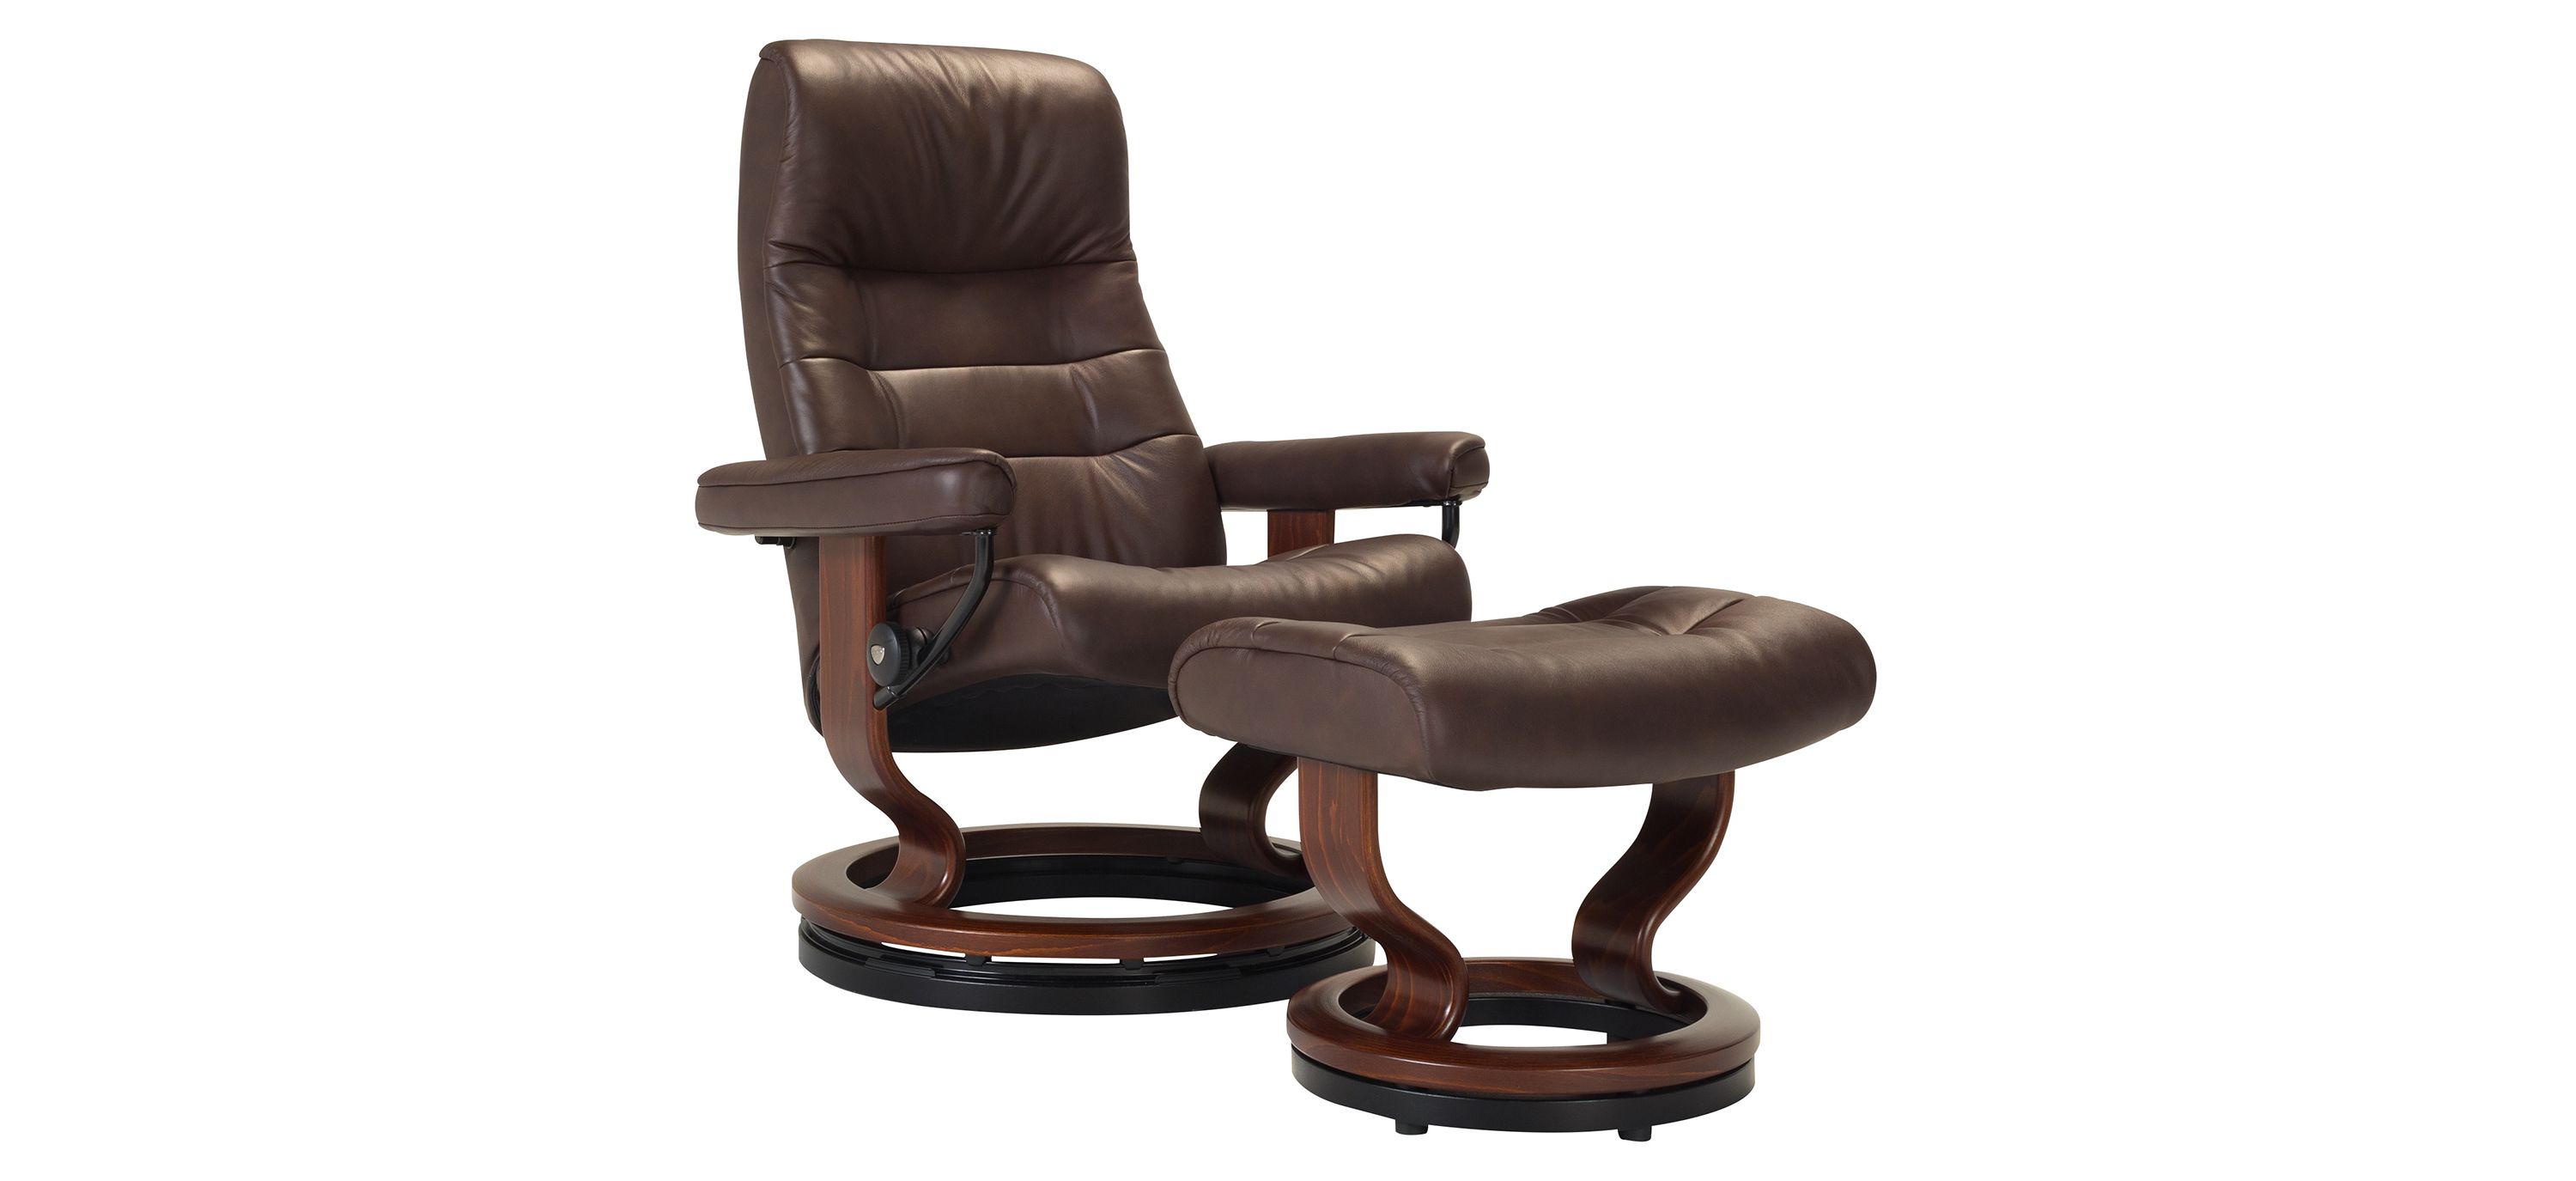 Stressless Opal Medium Leather Reclining Chair and Ottoman w/ Rings